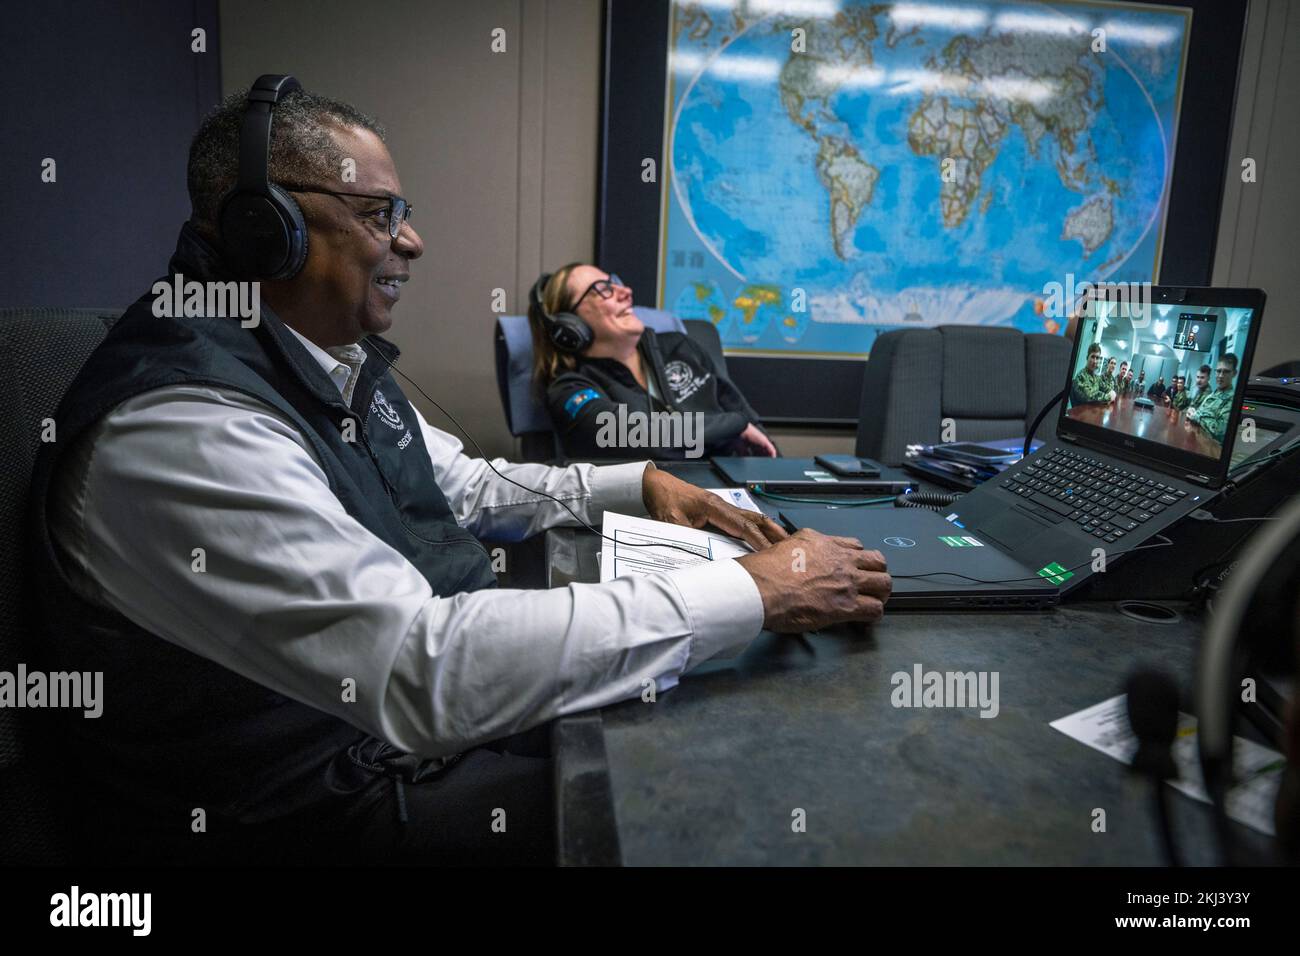 E4-B Aircraft, United States. 23rd Nov, 2022. U.S. Secretary of Defense Lloyd J. Austin III, holds holiday video calls to deployed service members from the conference room of an Air Force E4-B aircraft returning home from a week-long trip to Southeast Asia, November 23, 2022 over the Pacific Ocean. Credit: Chad J. McNeeley/DOD/Alamy Live News Stock Photo